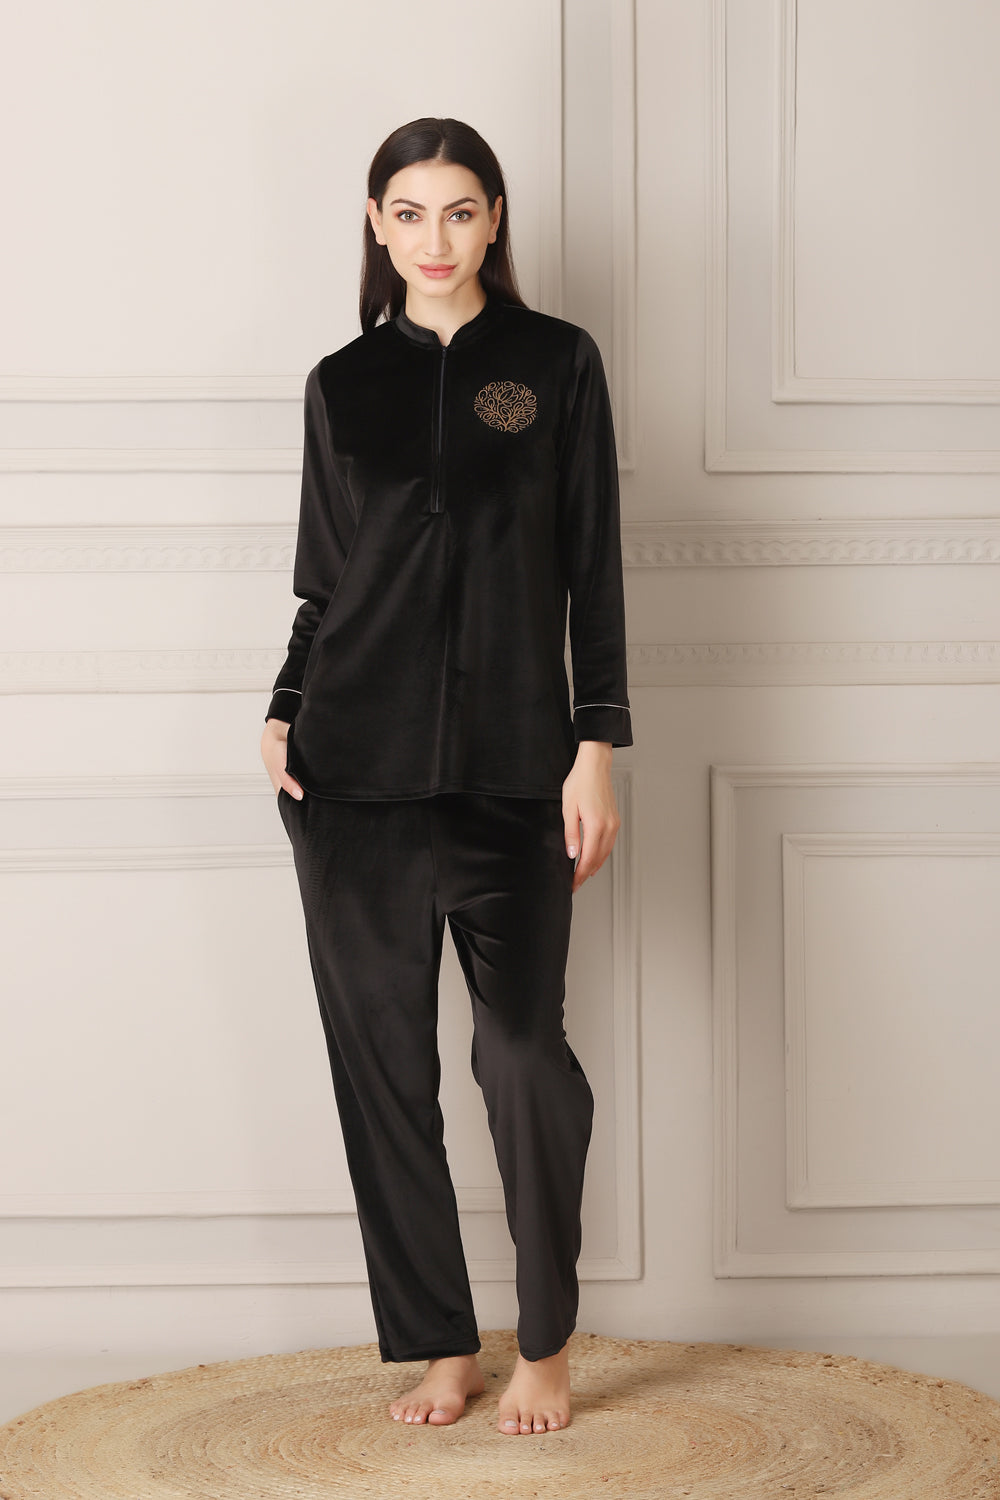 Warm Night suit in Super soft luxe Velvet Black Private Lives